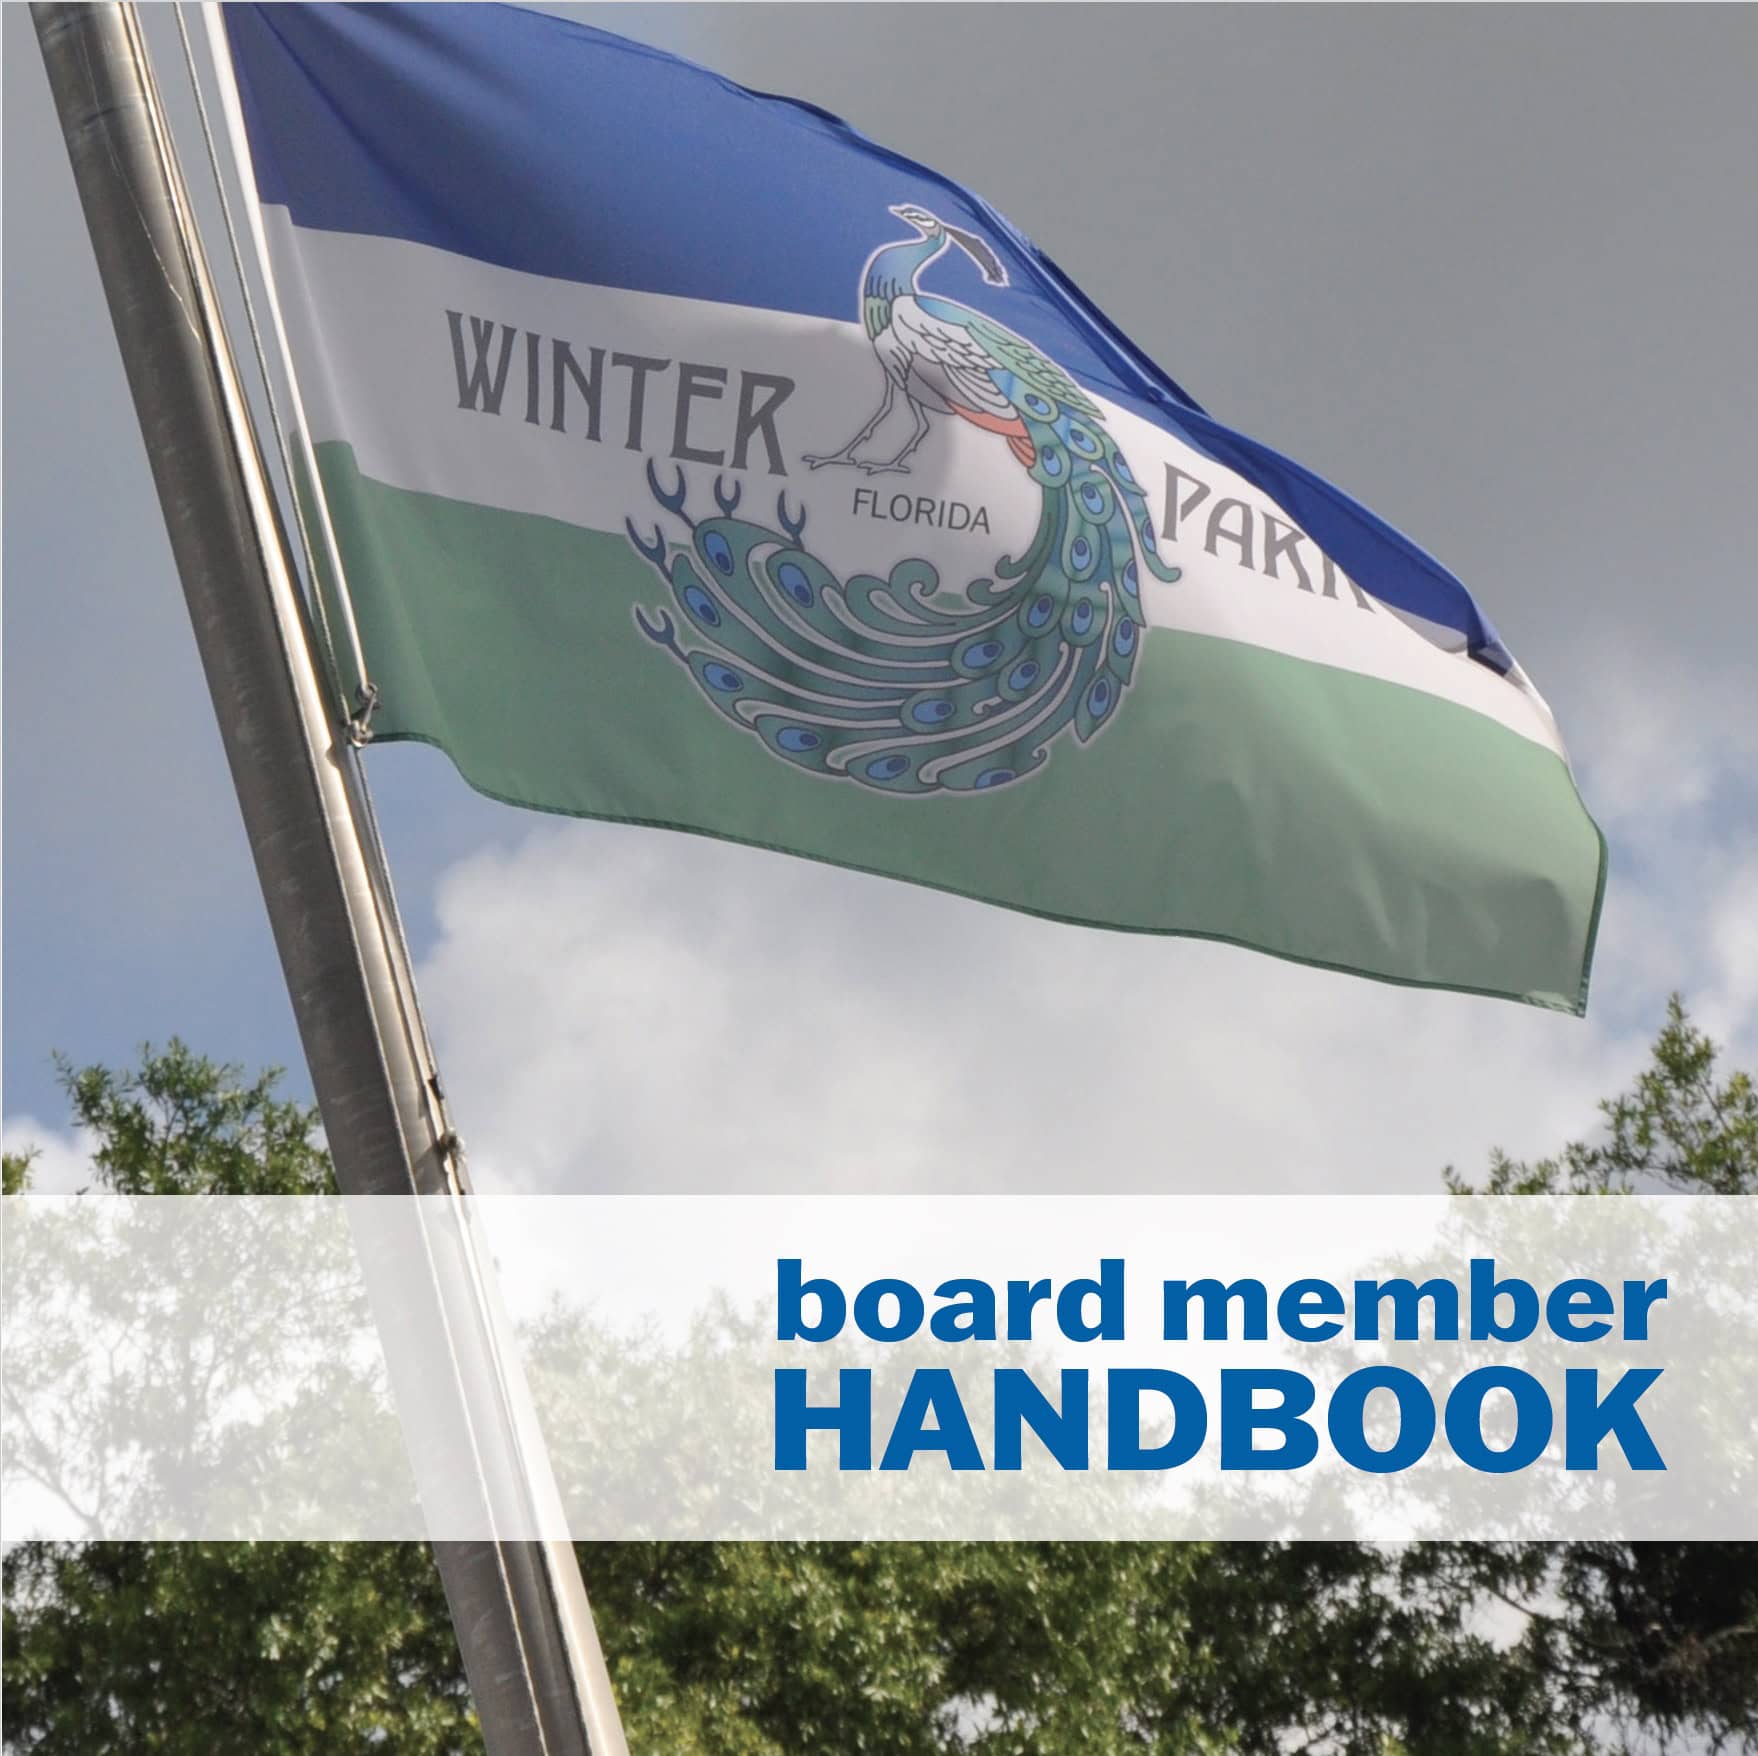 City of Winter Park flag blowing in the wind. Words that say board member handbook.